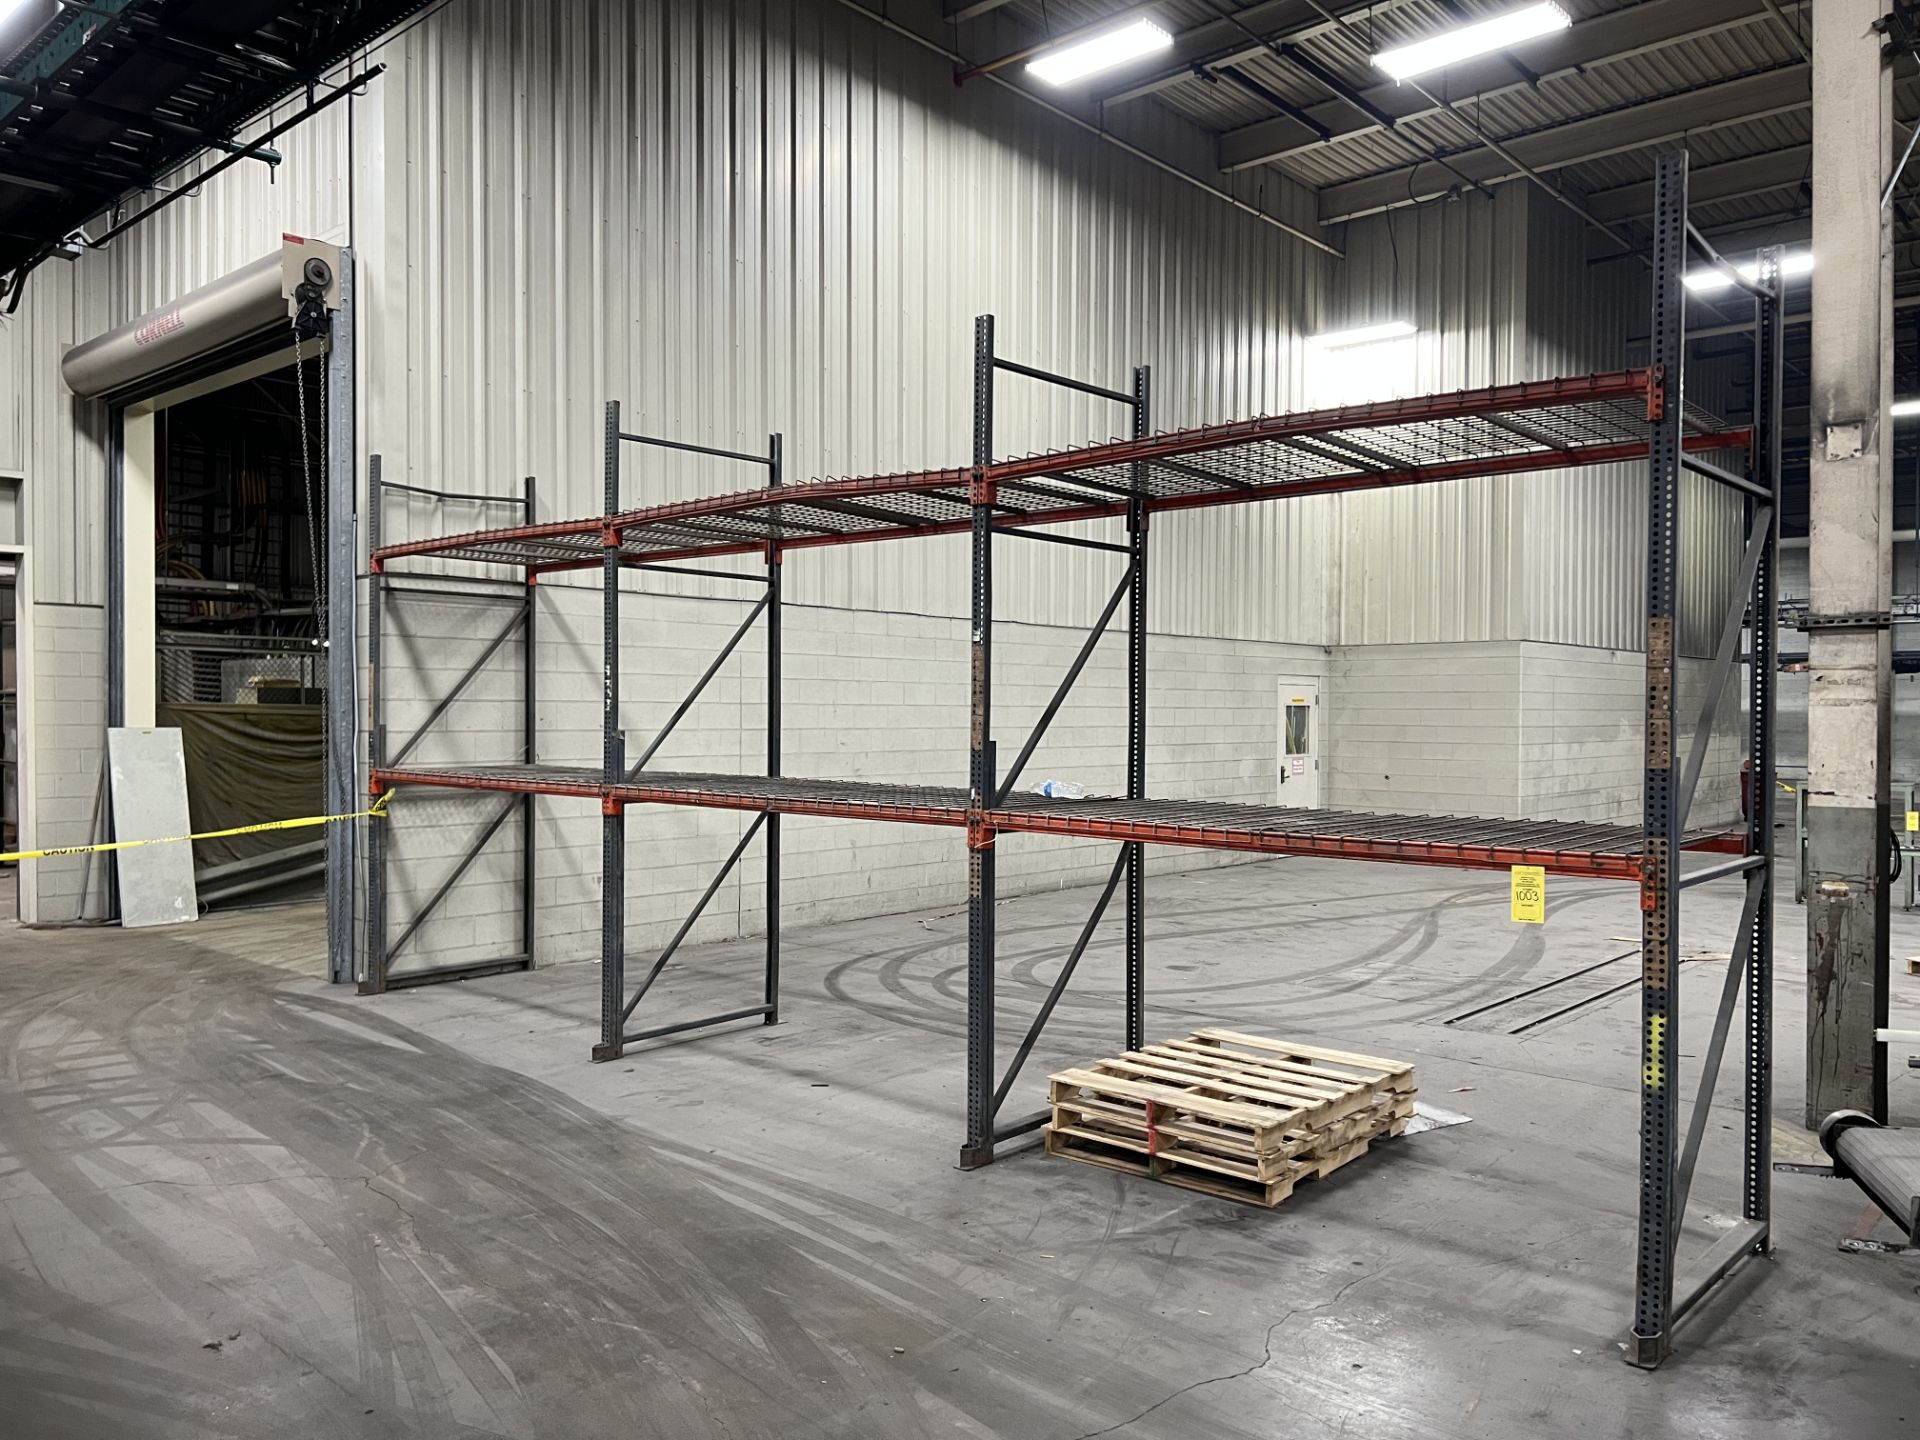 PALLET RACKING WITH WIRE SHELVING: (4) 11' UPRIGHTS; (12) 8' CROSSBEAMS